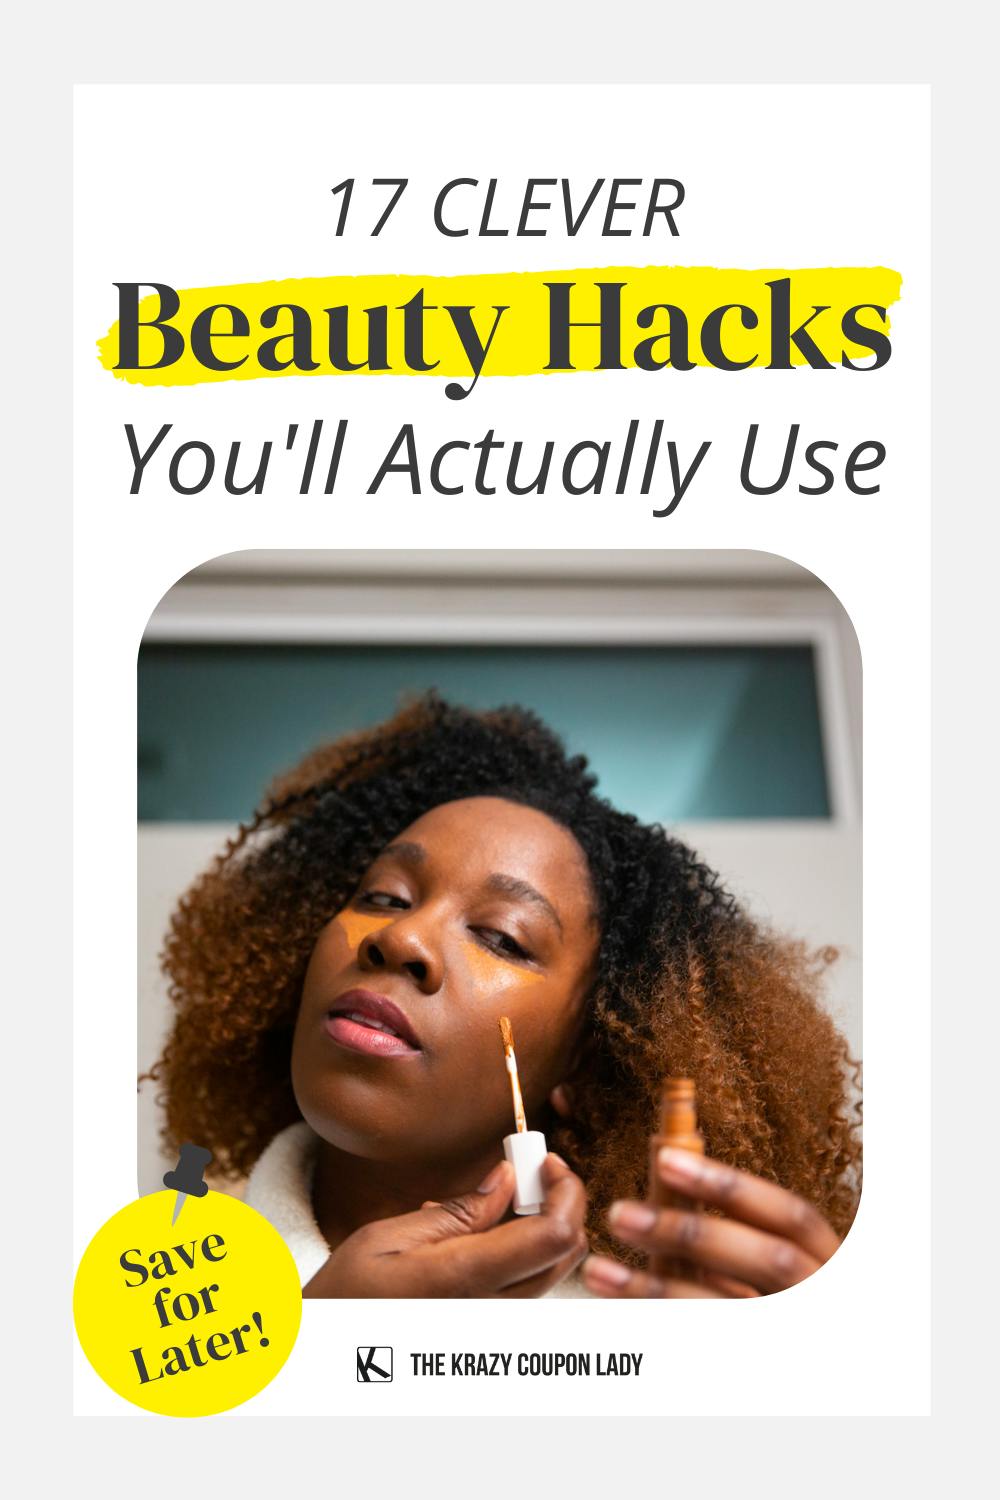 17 Clever Beauty Hacks You'll Actually Use